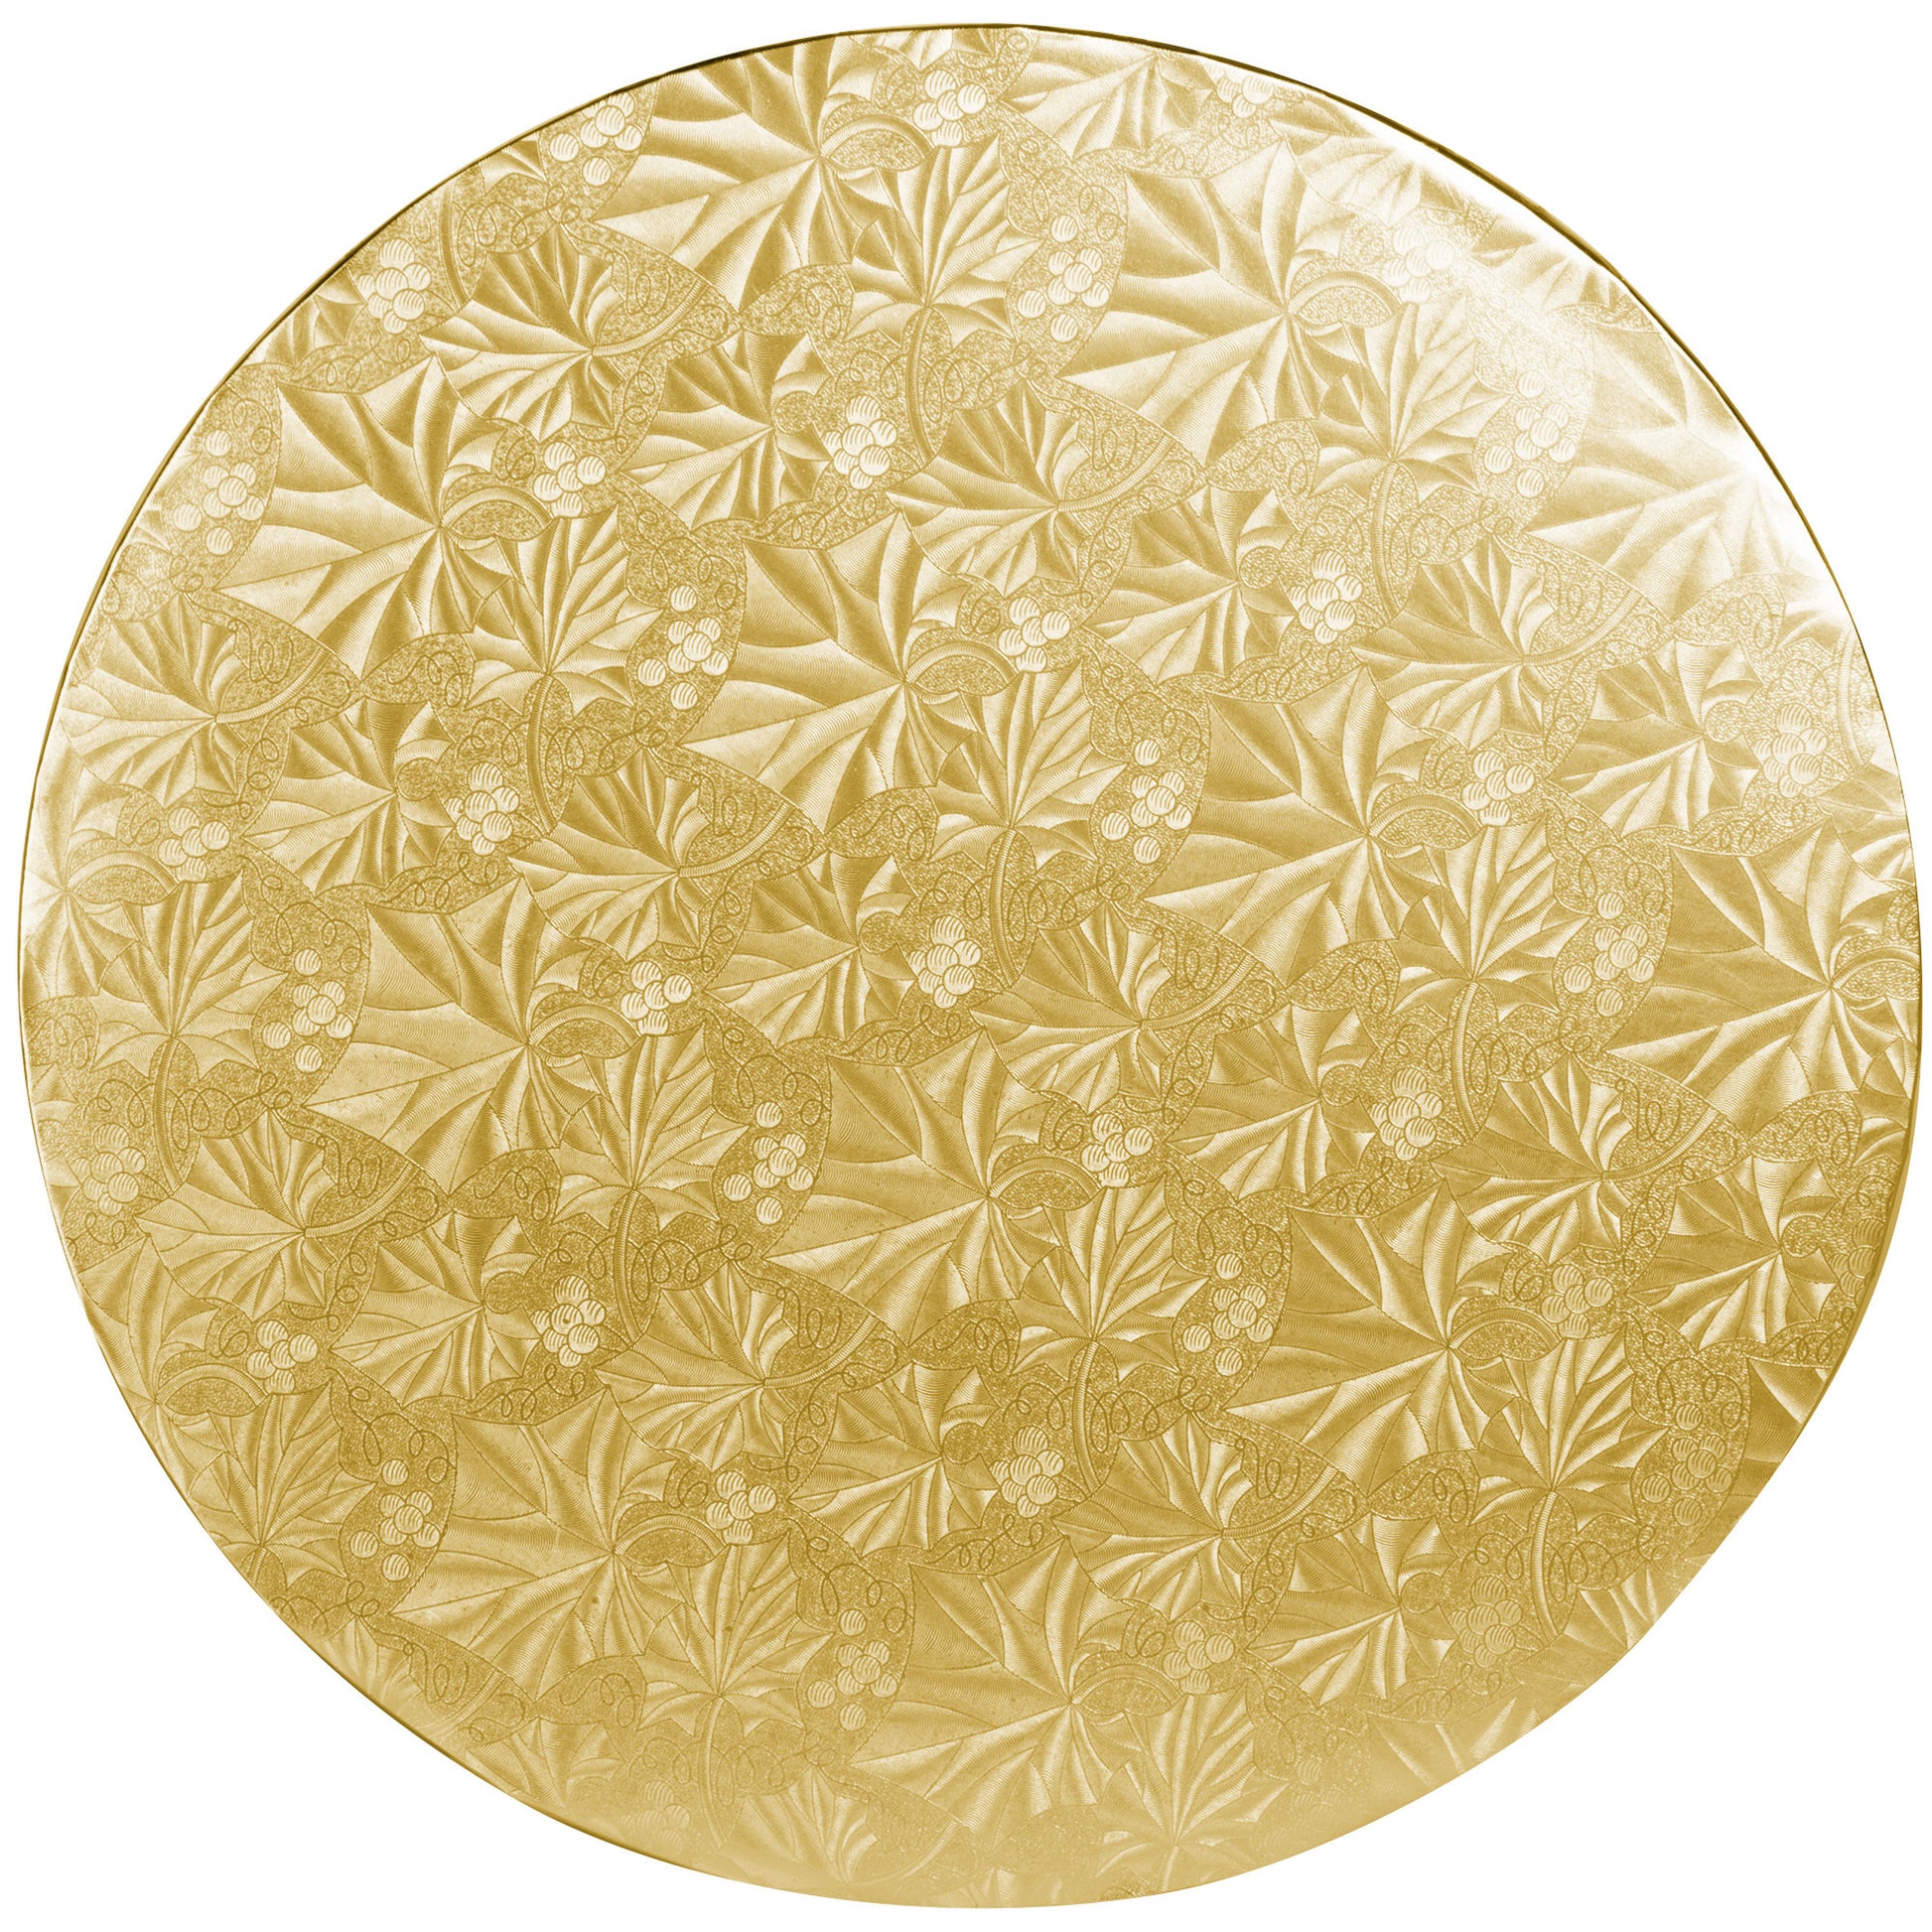 image of 12 inch round gold cake drum that is 1/2 inch thick